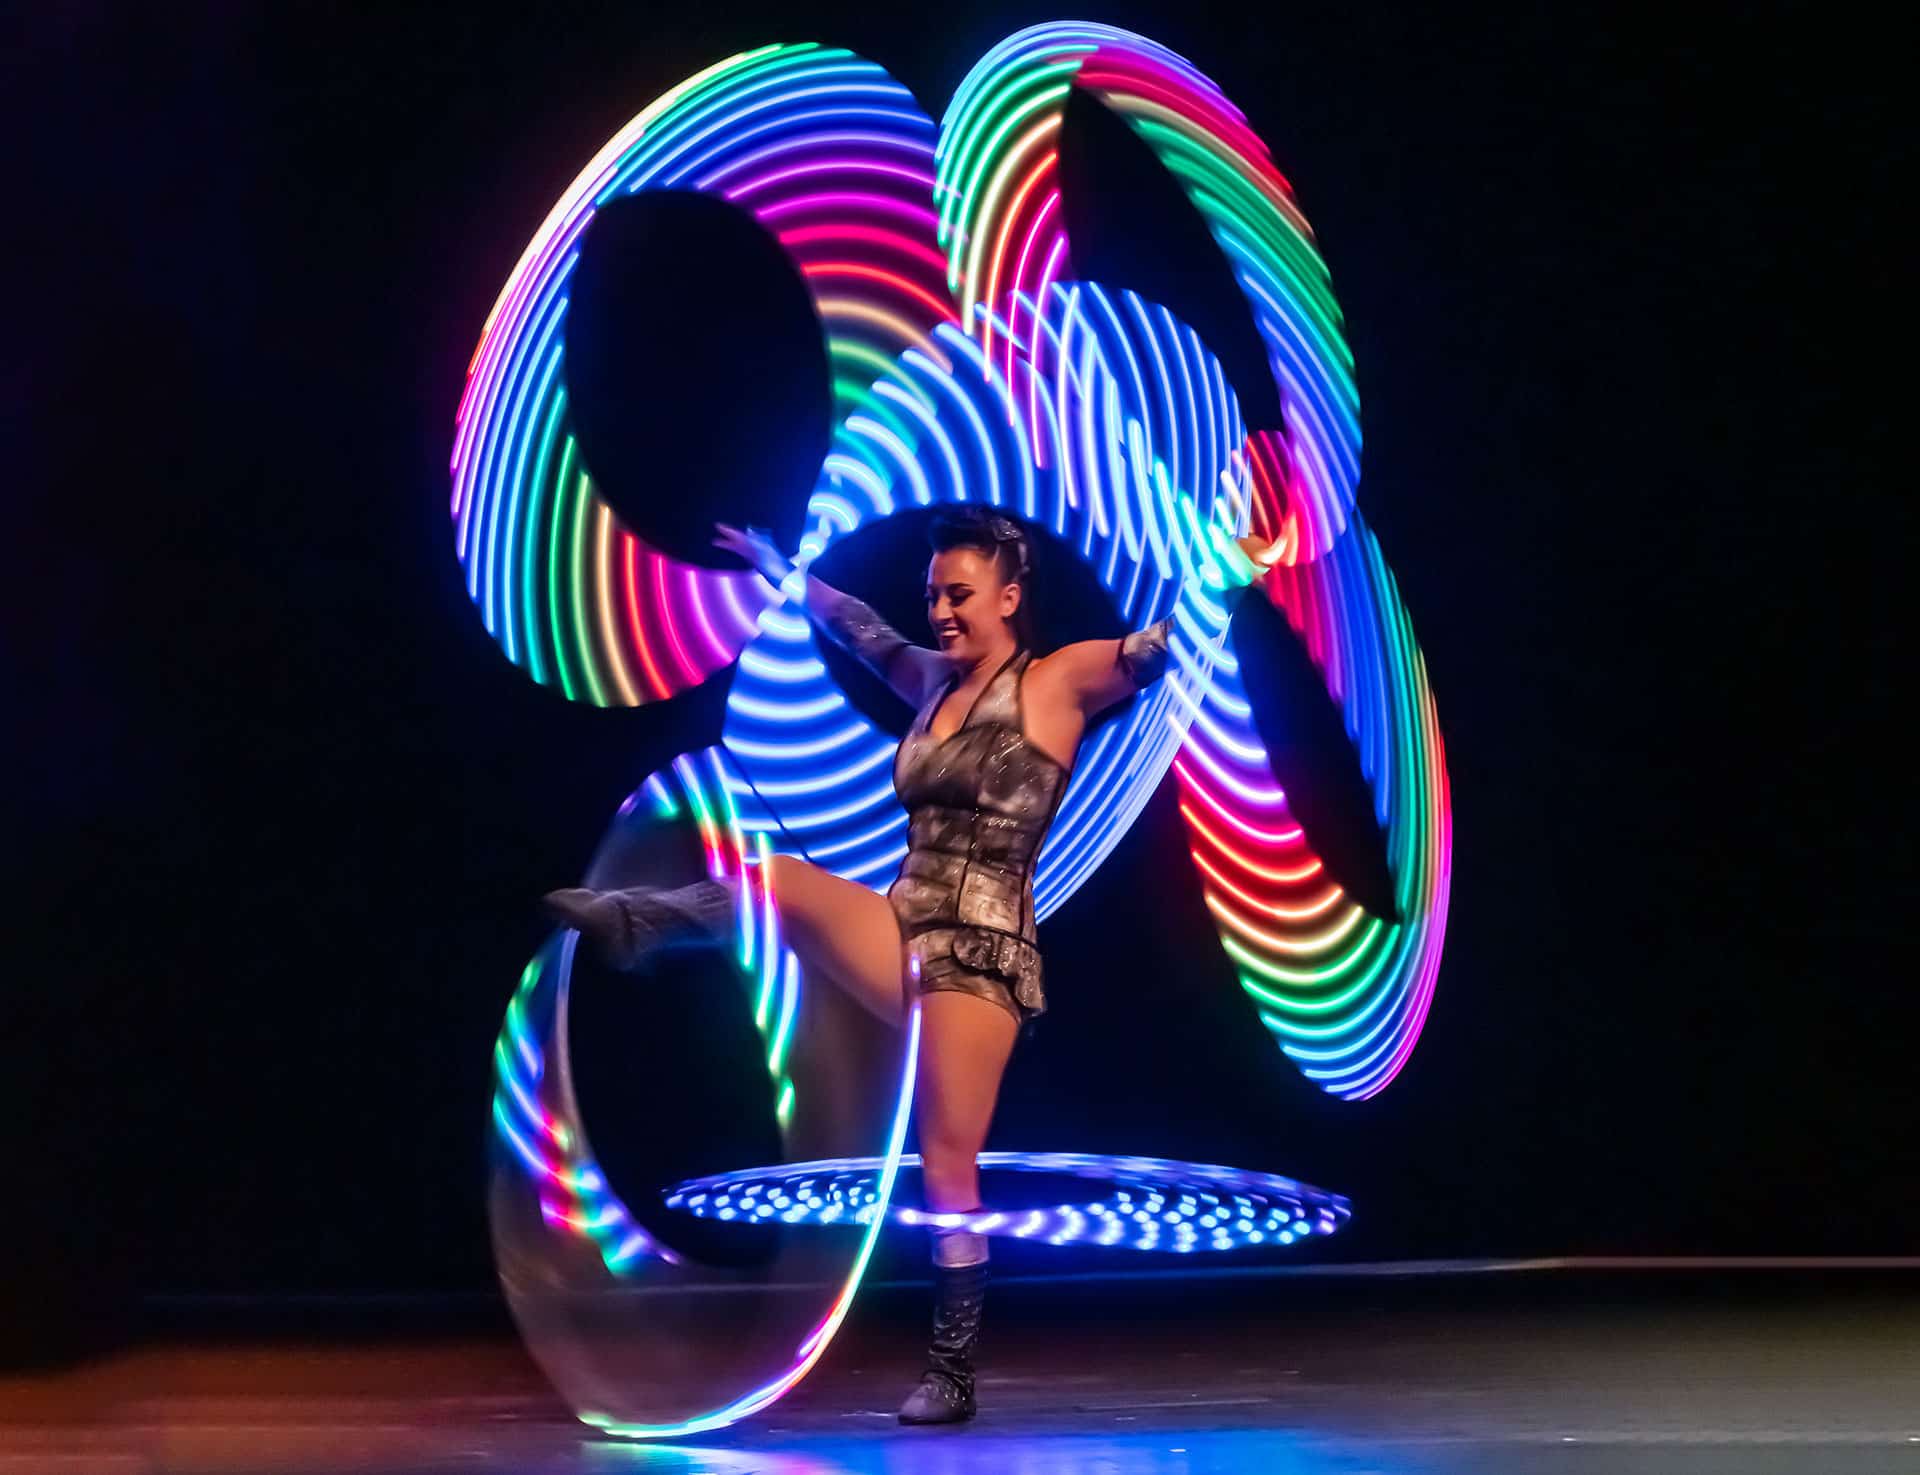 A young woman with dark brown hair standing on her left leg and spinning silver hula hoops on her arms and right leg. She is wearing a black and red costume with black boots and has a backdrop of a circus ring behind her.